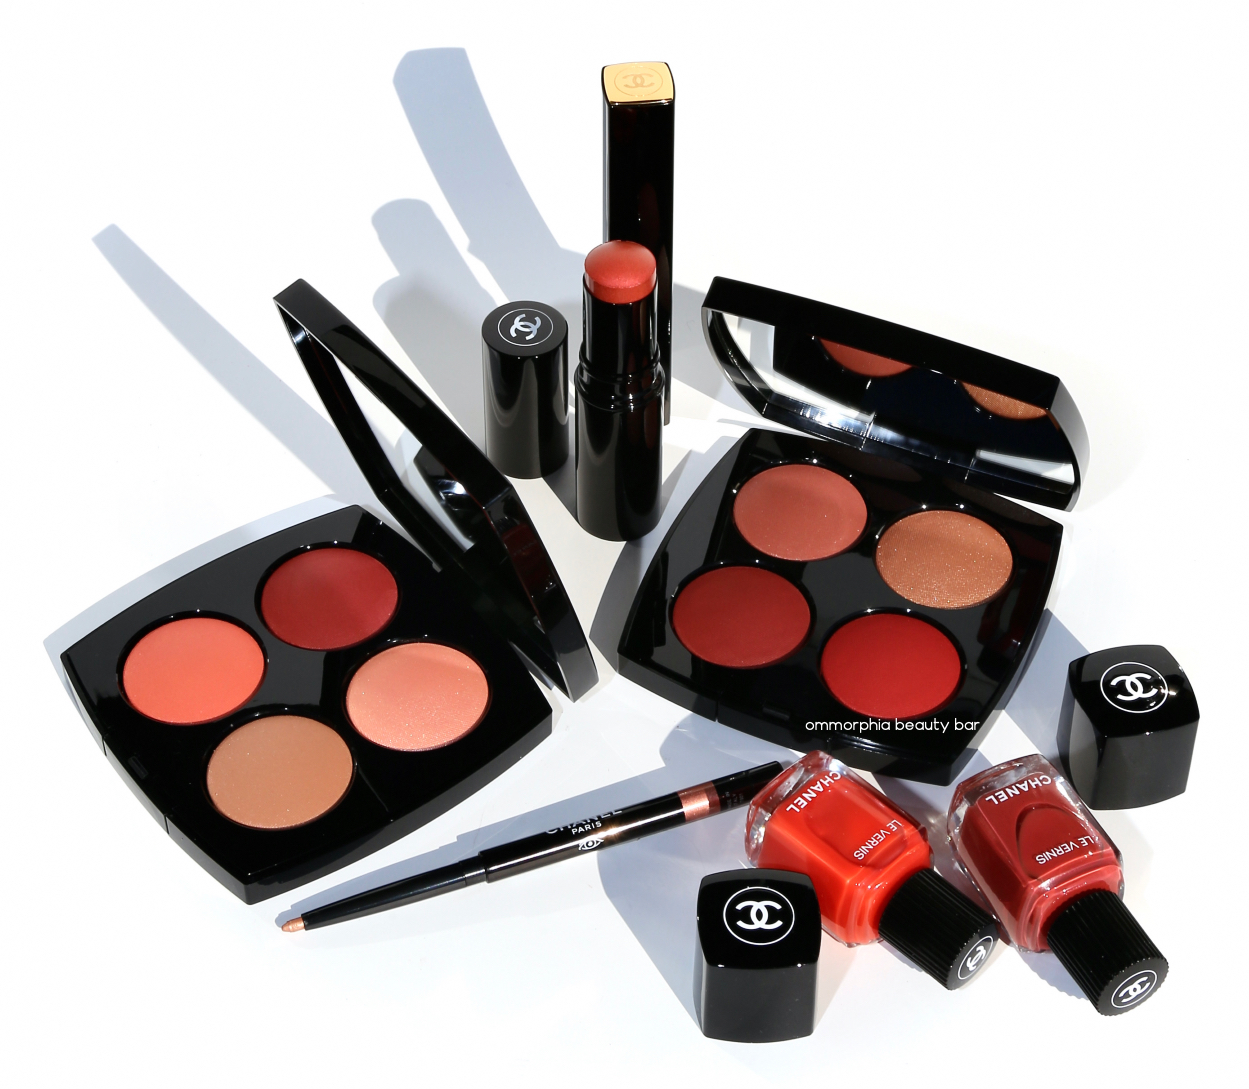 chanel makeup offers